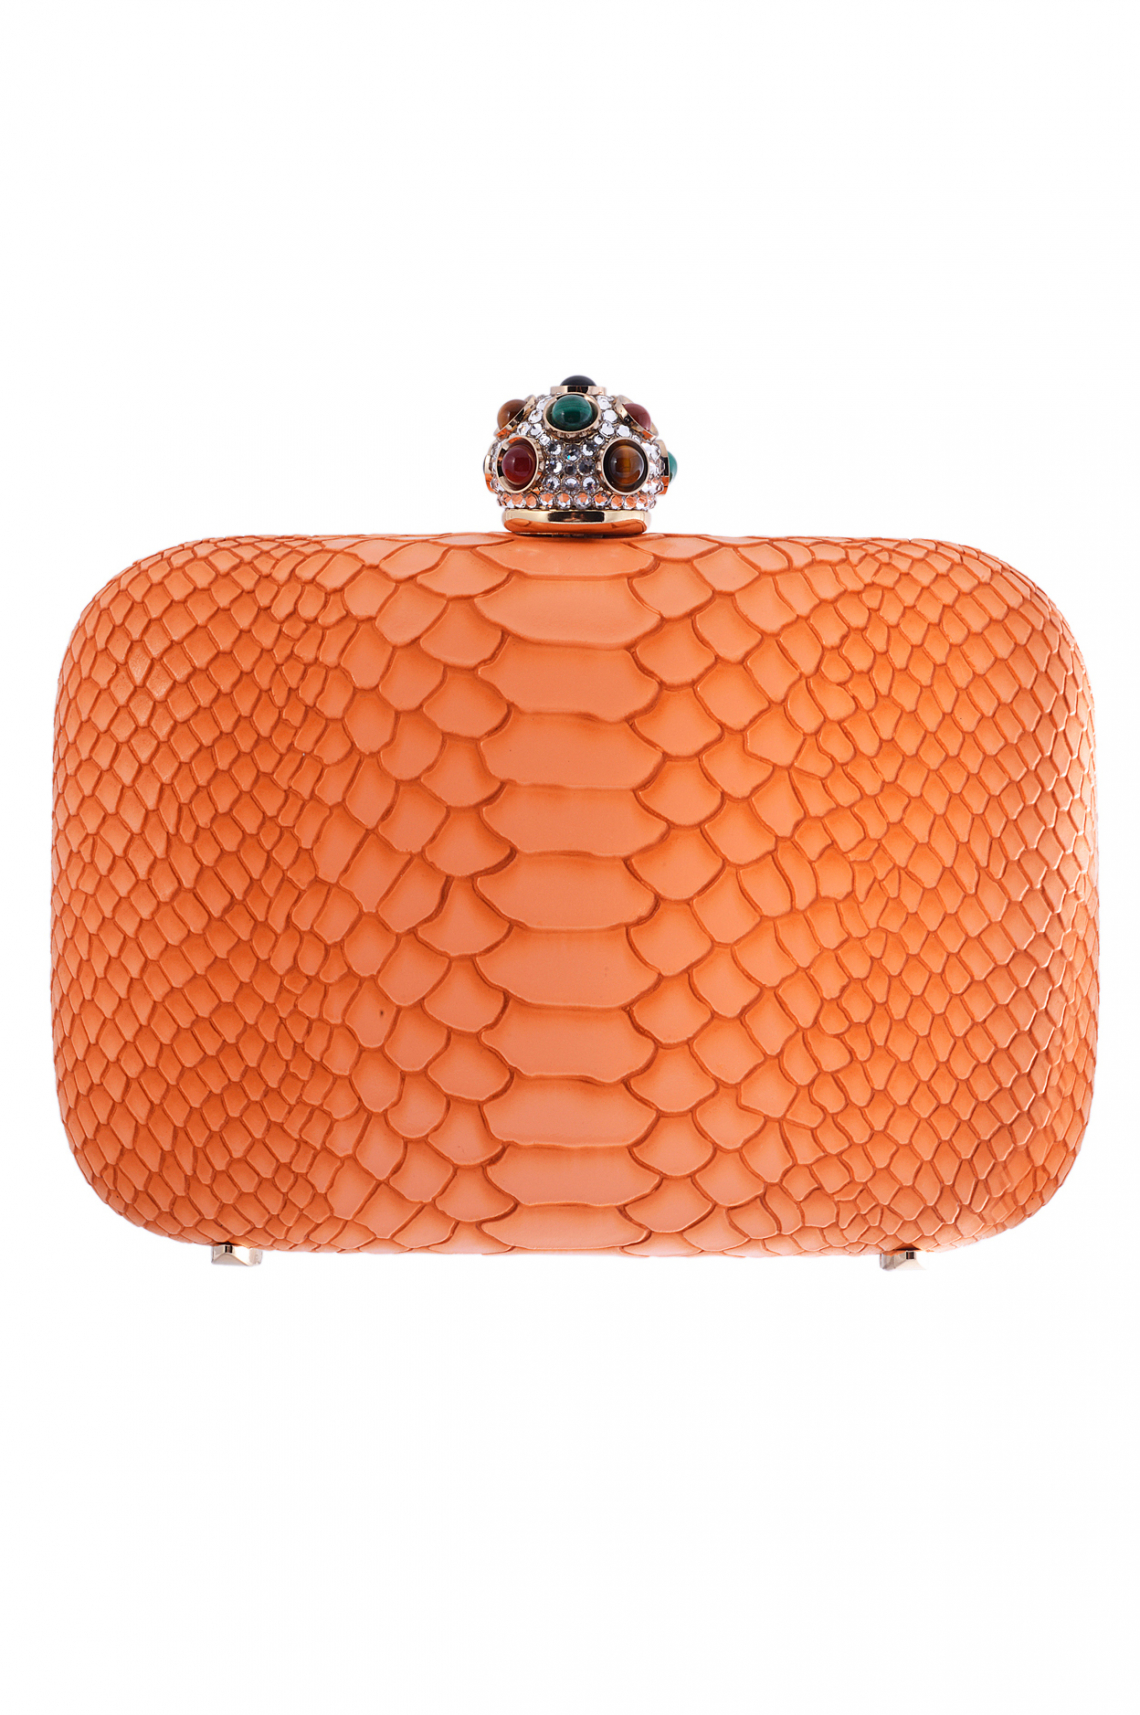 Shop Florence Orange Clutch for AED 750 by Amishi | Accessories ...